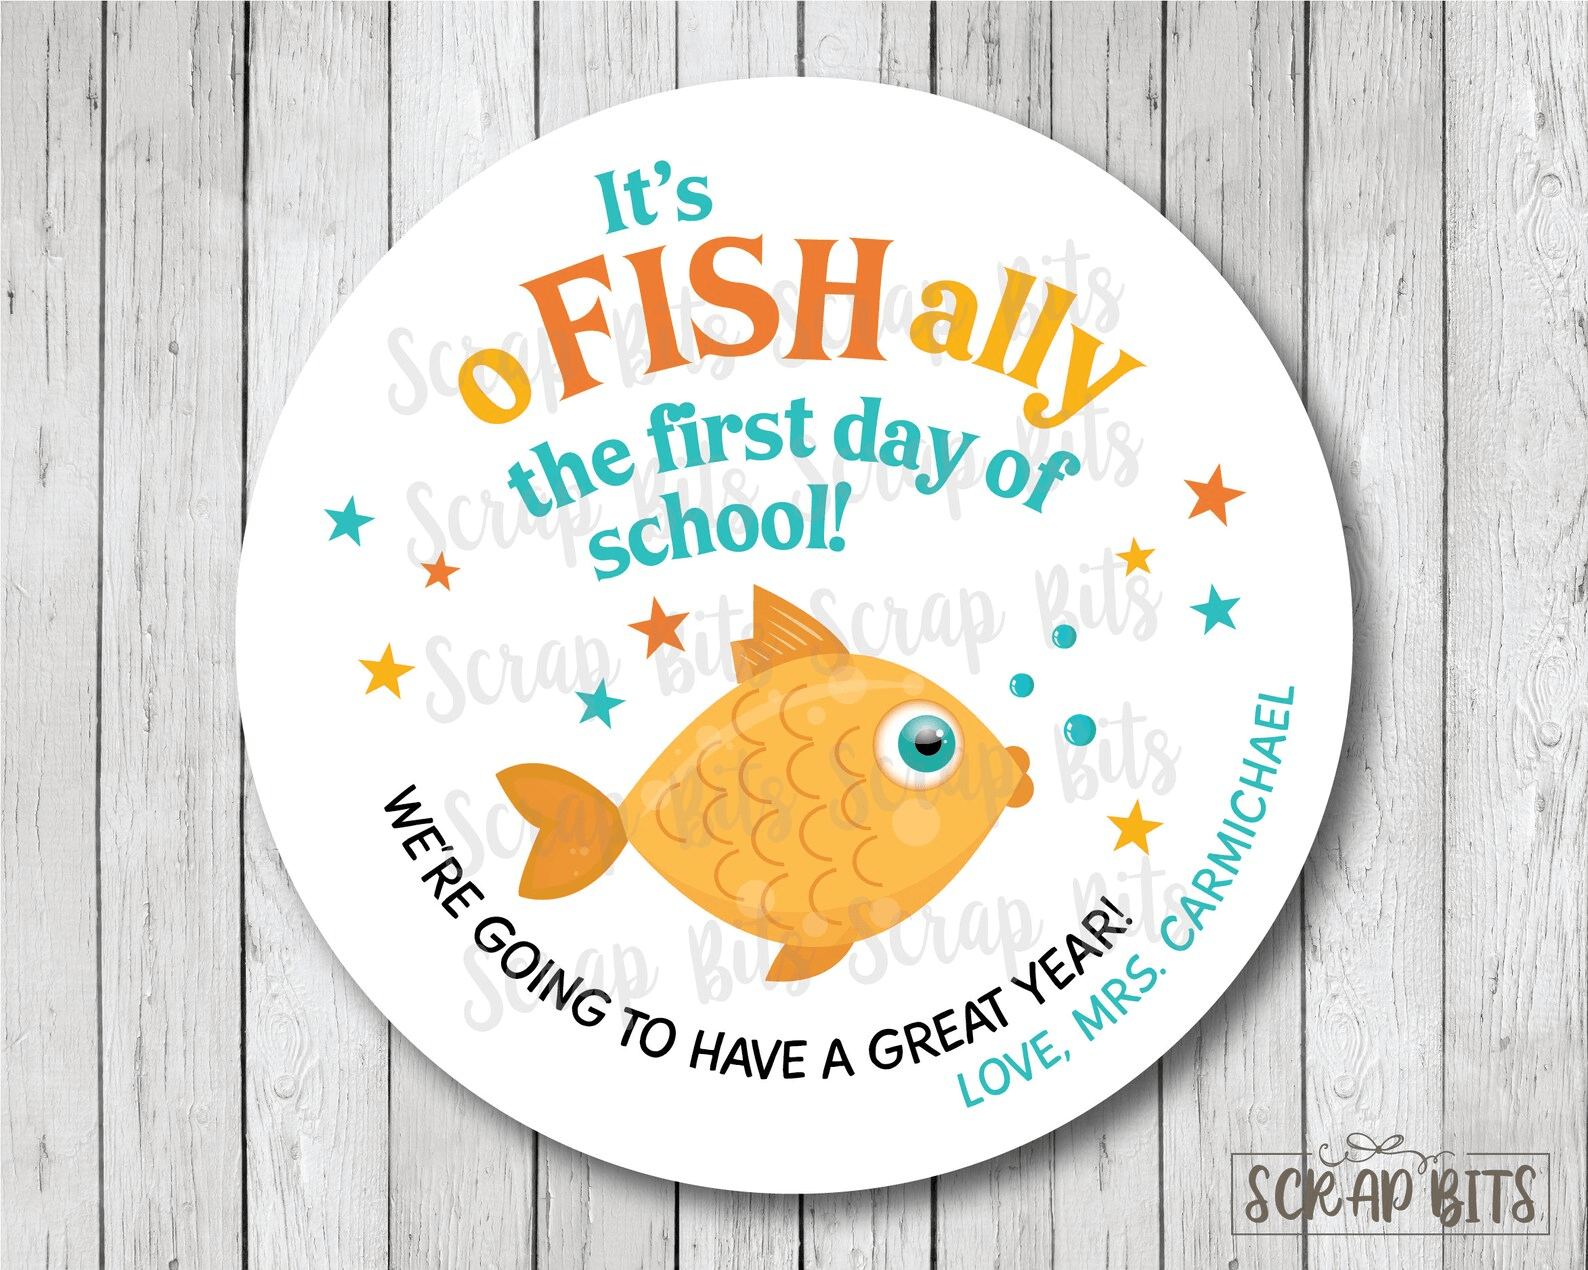 O-Fish-Ally Goldfish First Day of School Back To School Stickers or Tags - Scrap Bits